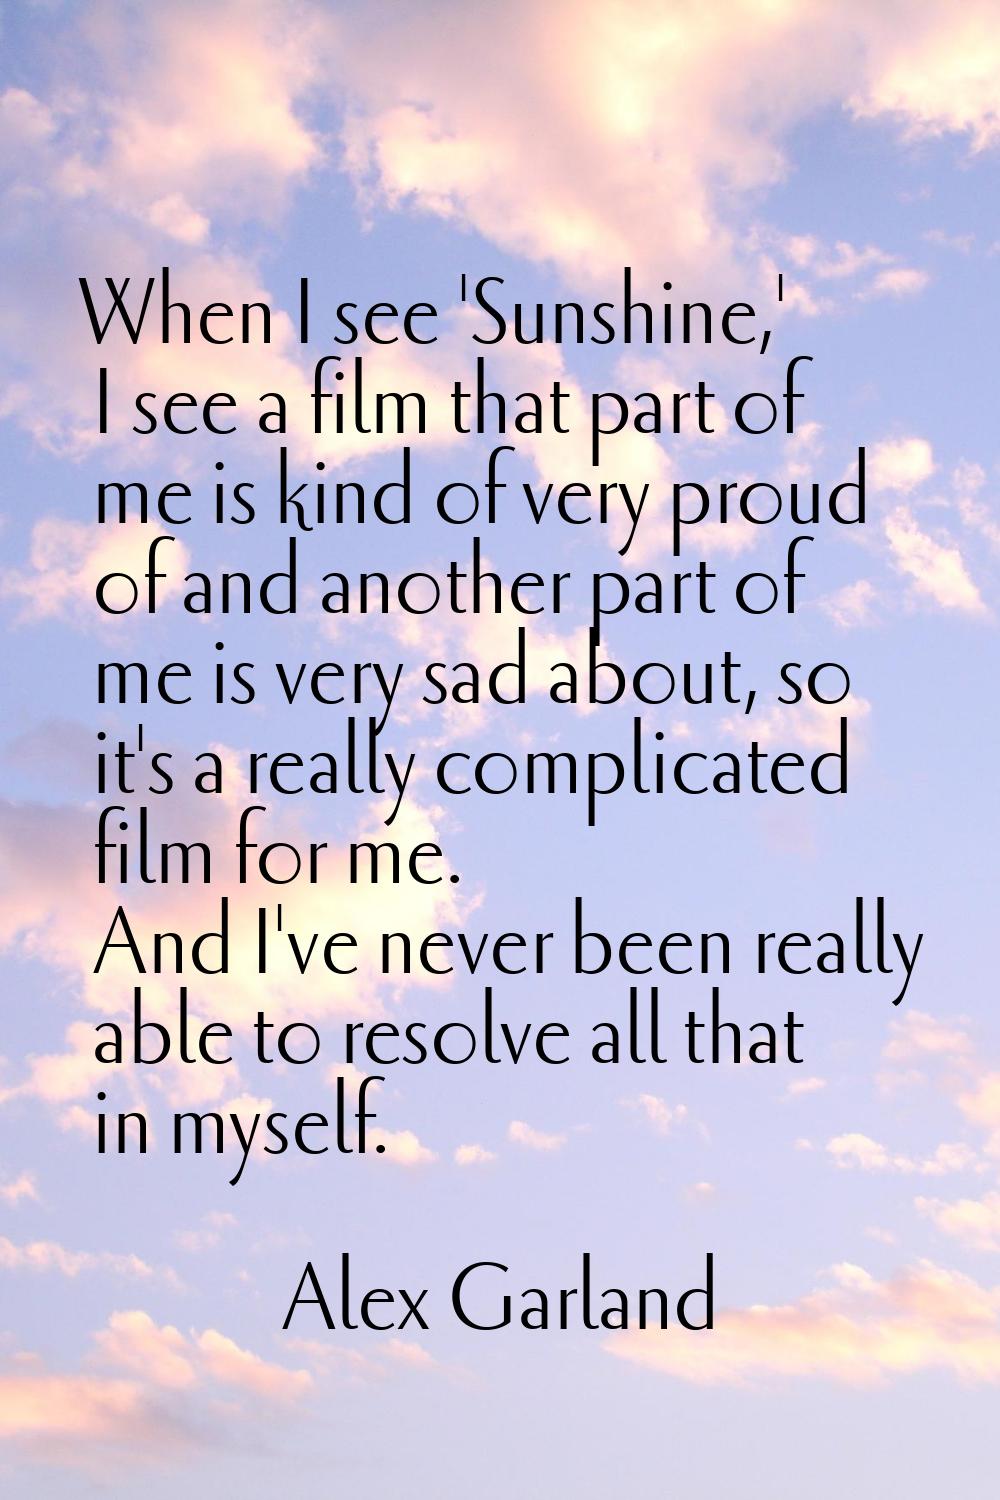 When I see 'Sunshine,' I see a film that part of me is kind of very proud of and another part of me